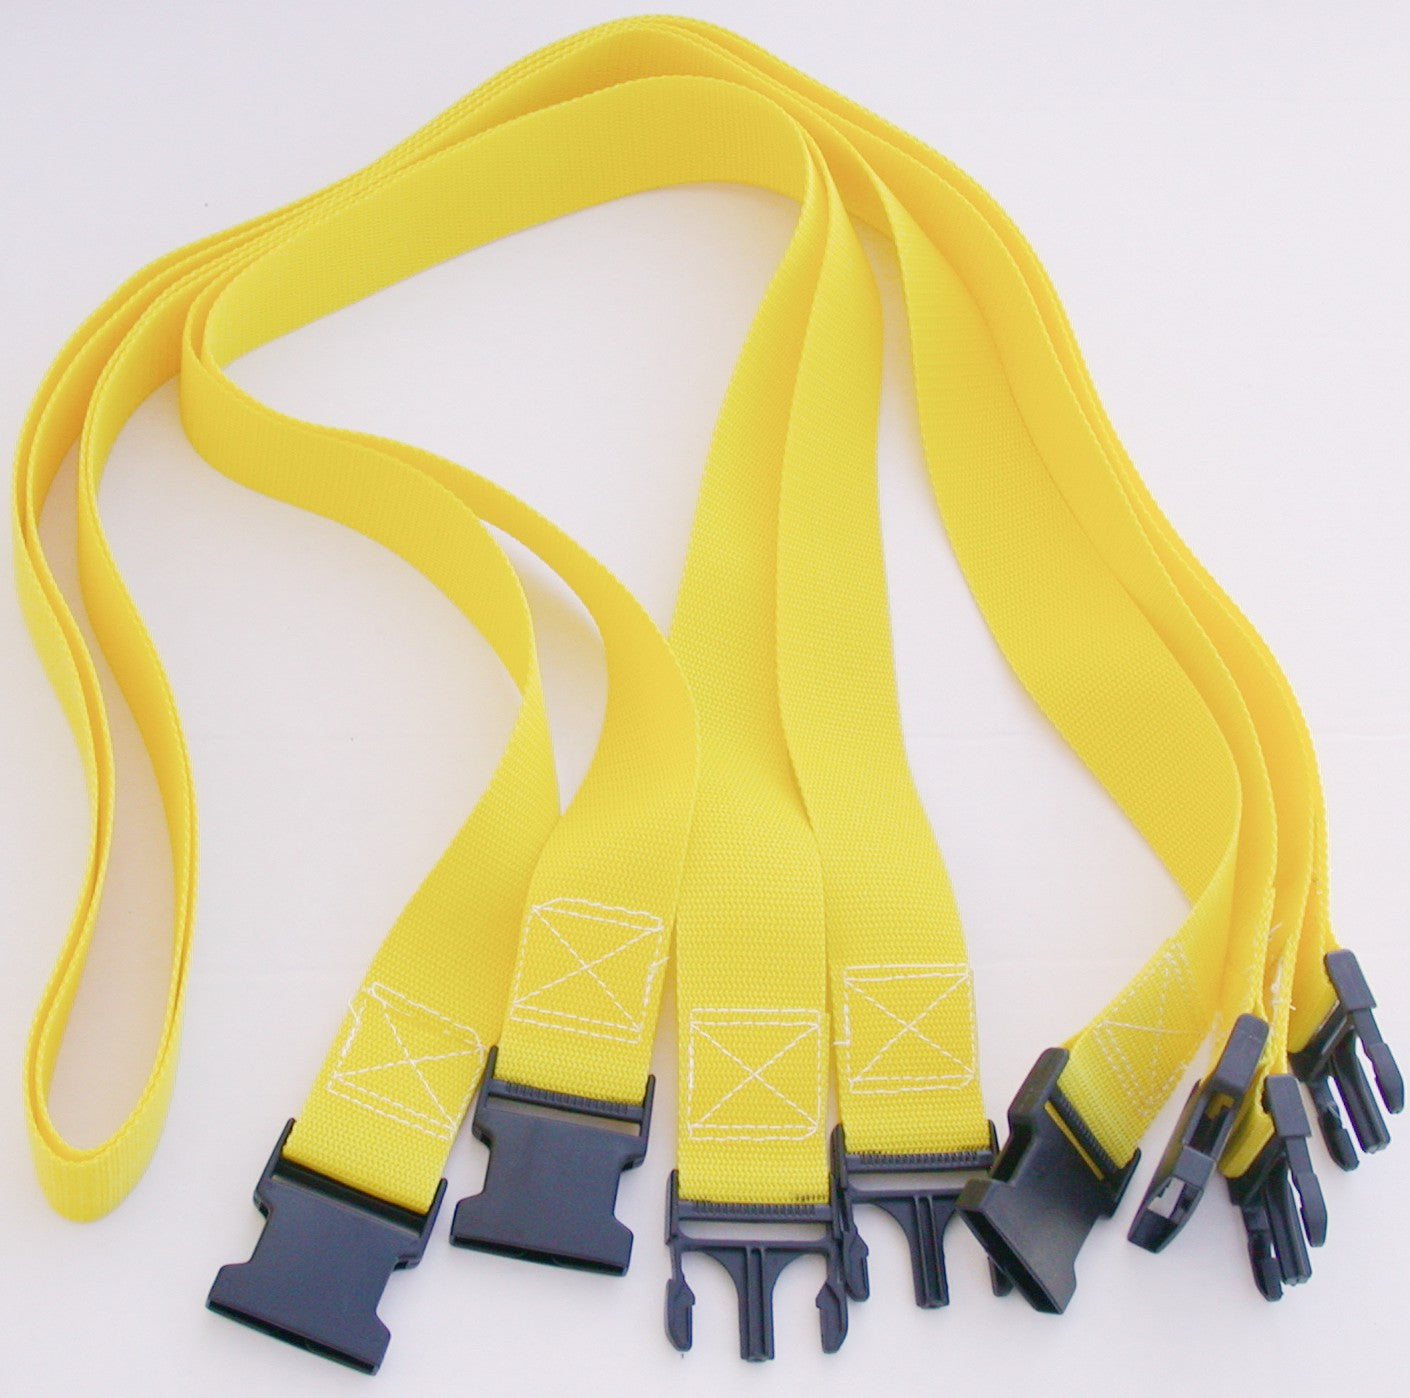 M8EXTY-Yellow webbing boundary extension lengths 26.3 to 30-ft court size